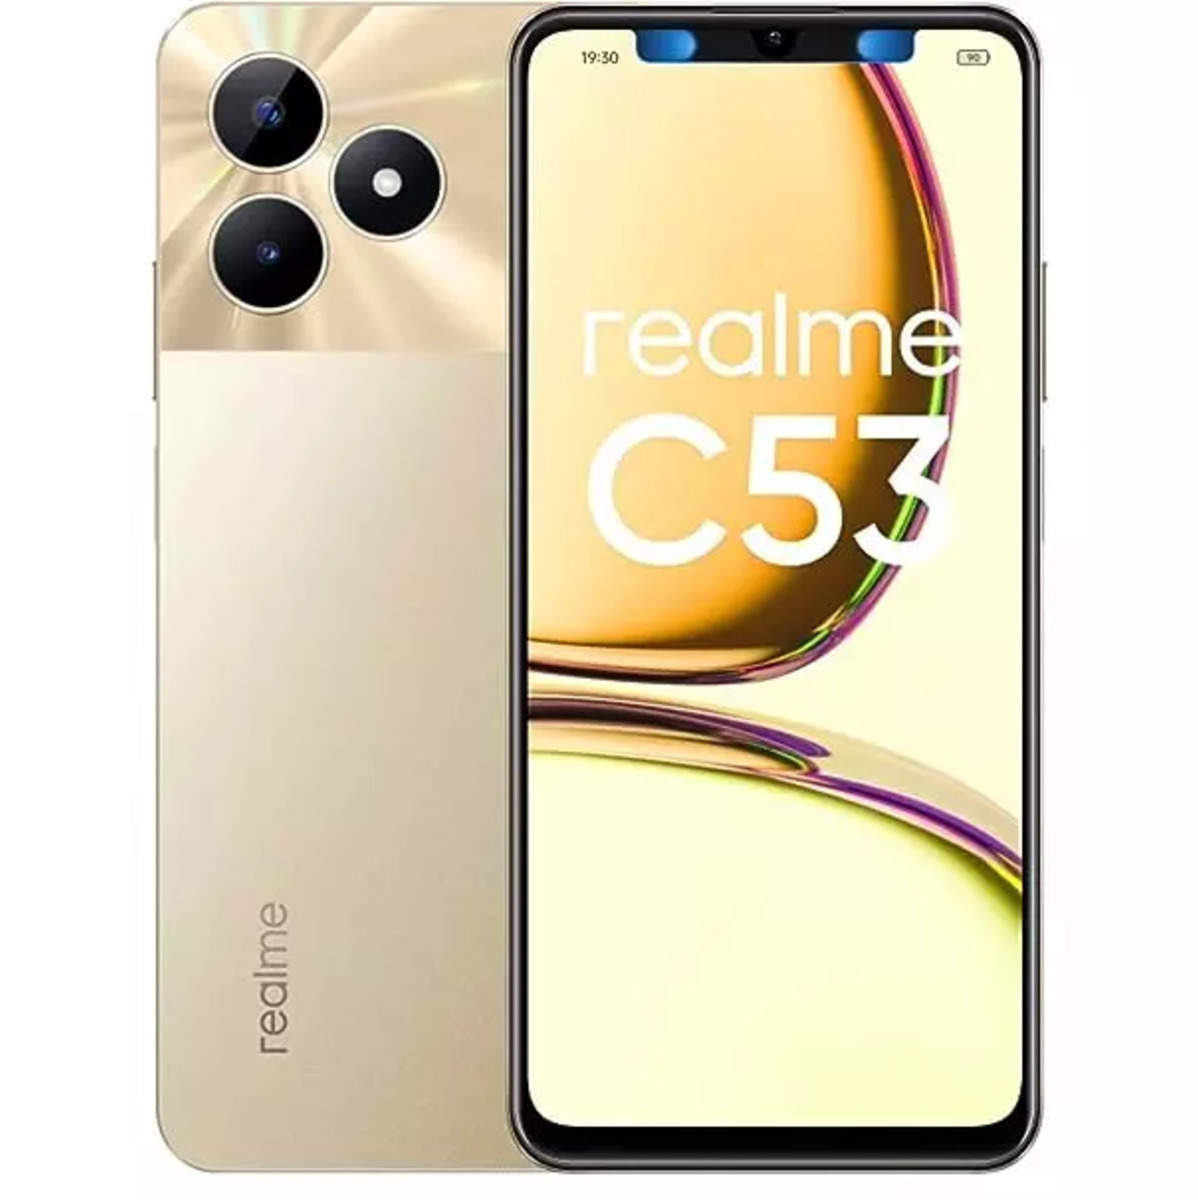 Realme C53: Realme C53: Comprehensive review, competitive price, exciting  features, and more - The Economic Times